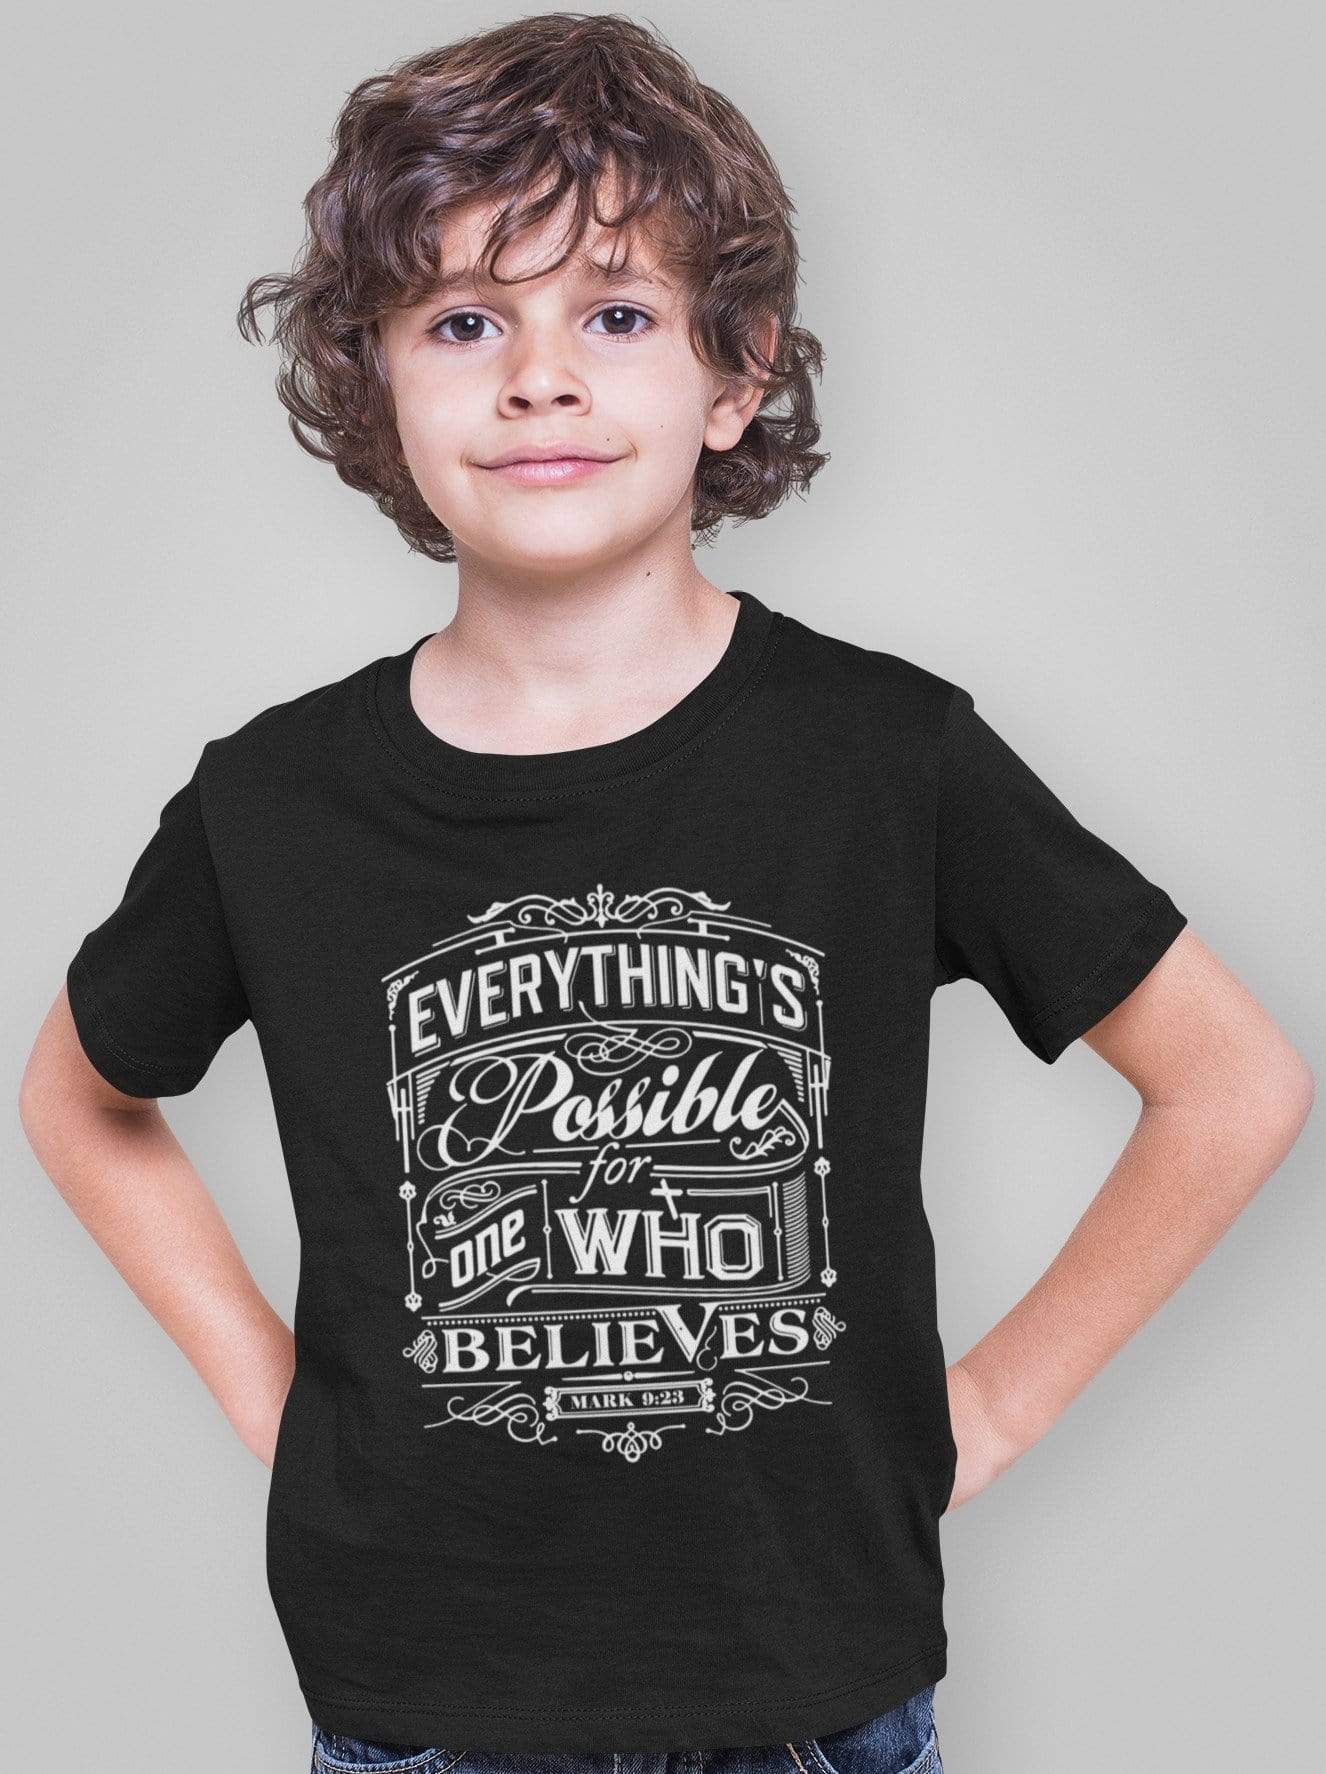 Living Words Kids Round Neck T Shirt Boy / 0-12 Mn / Black Everything possible